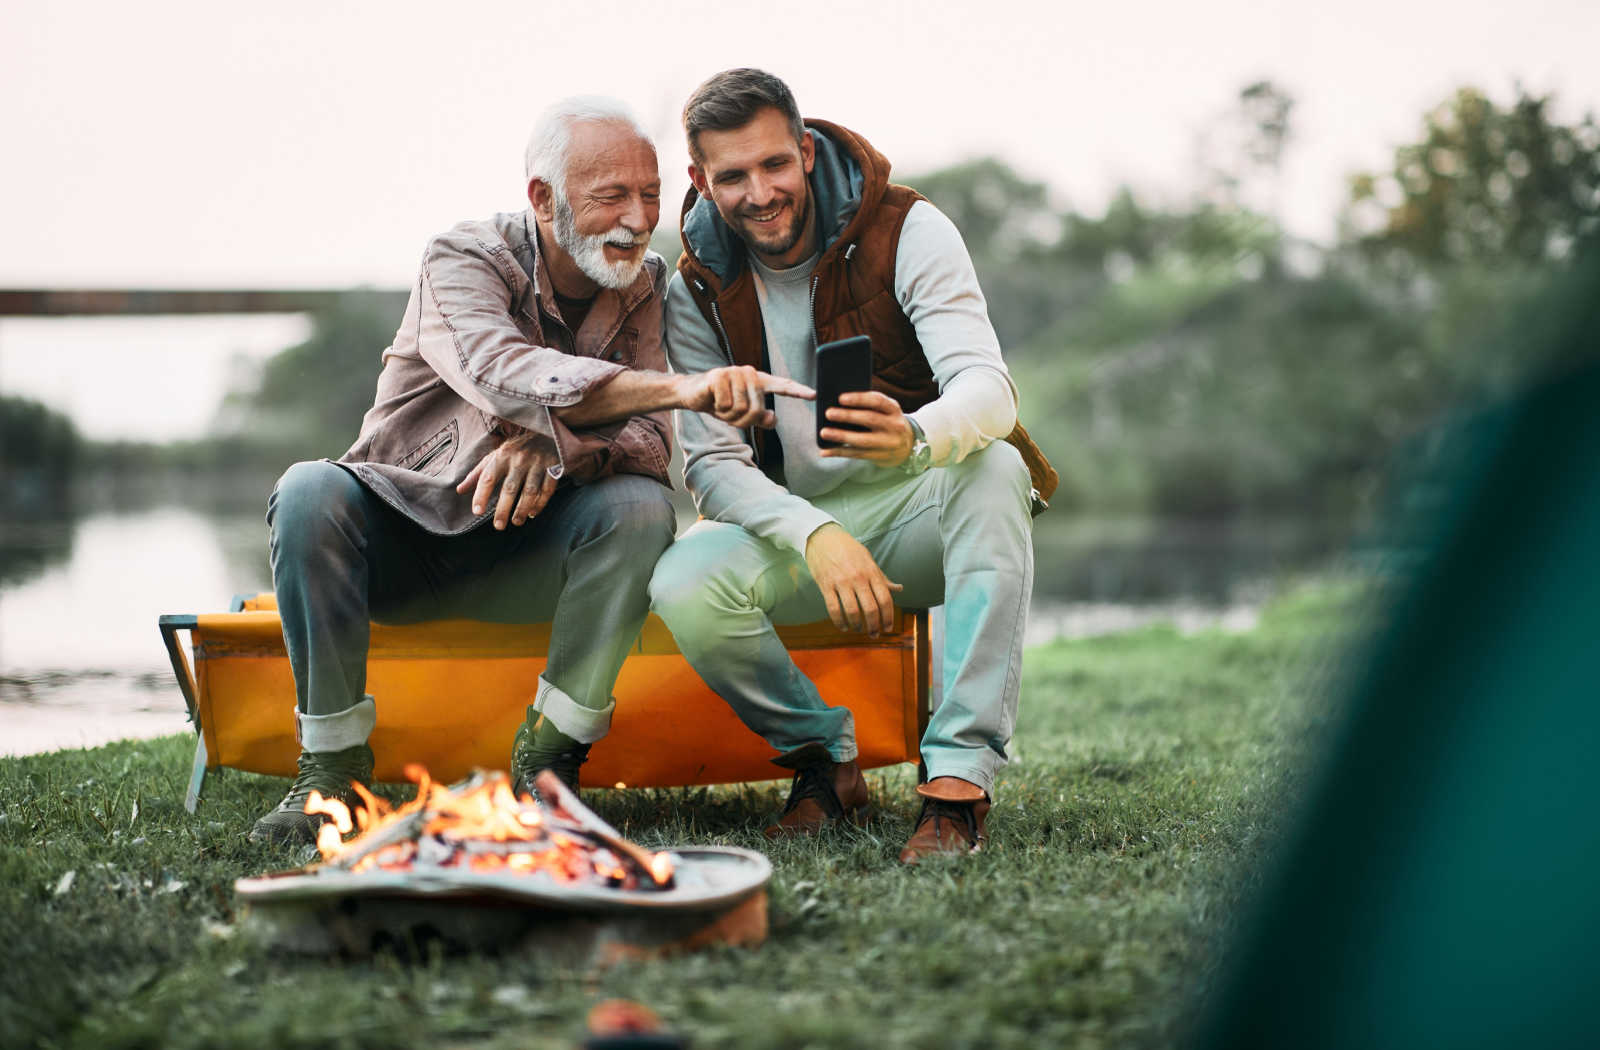 A young man and his elderly father sitting by the campfire at sunset having fun while using a smartphone.